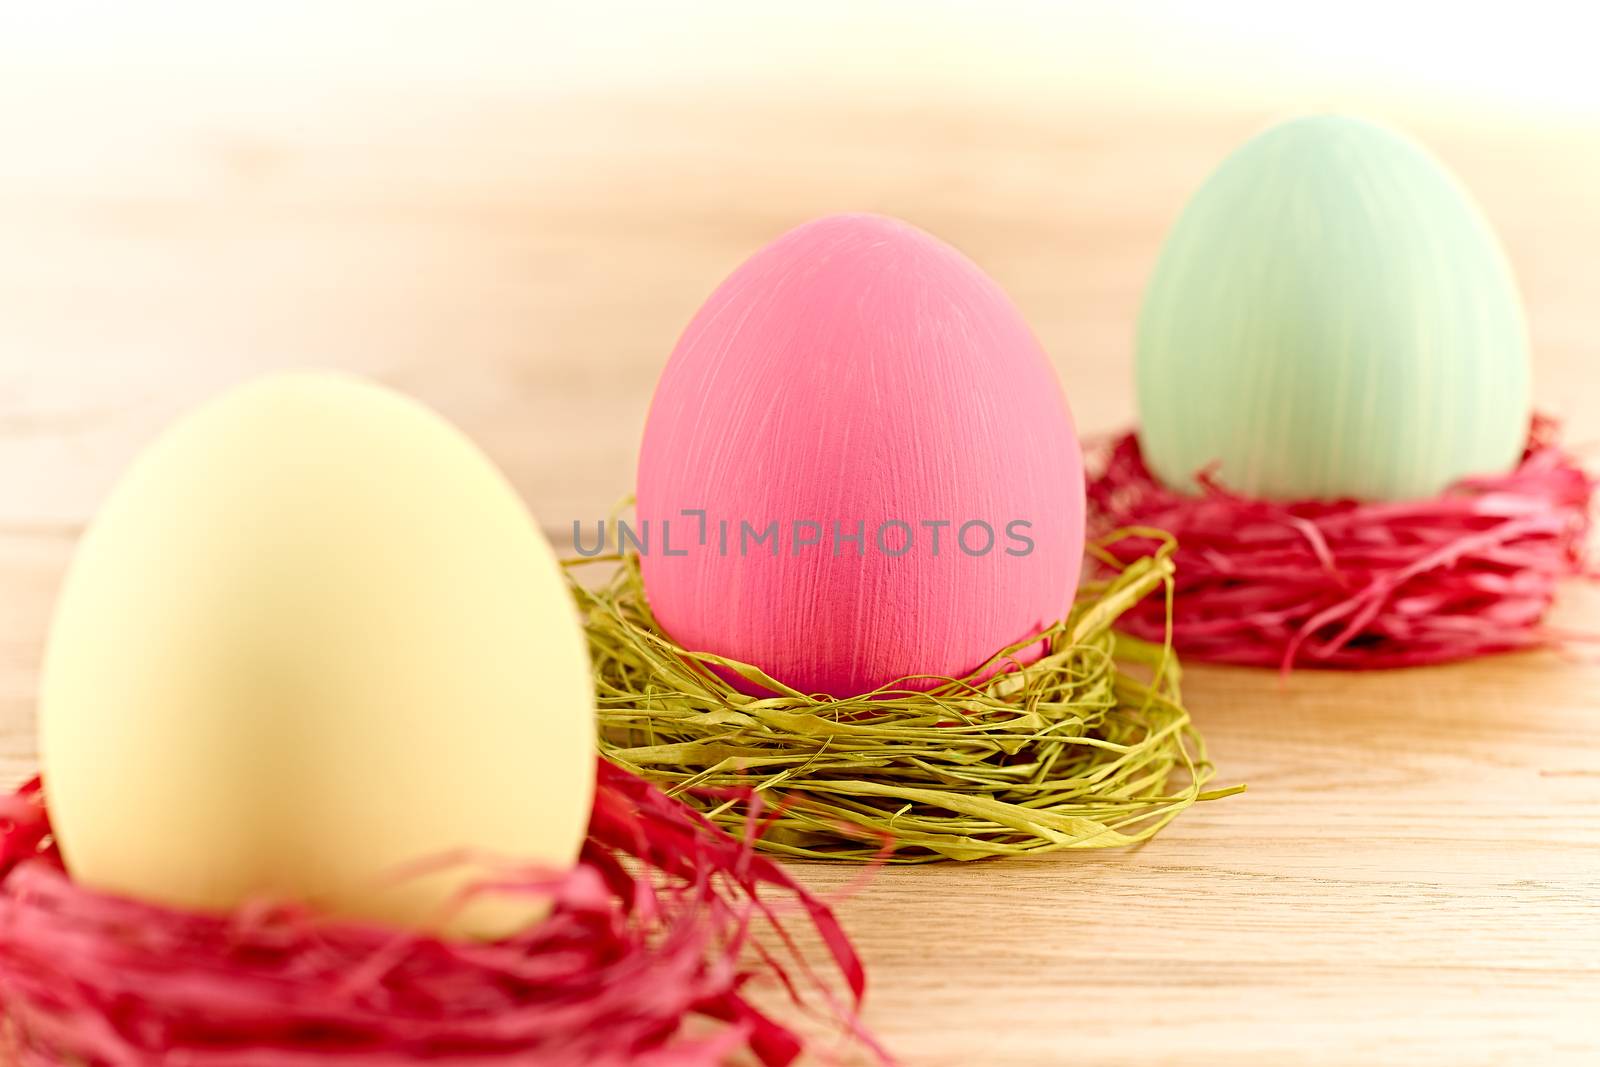 Easter painted eggs in nests, handmade on wood by 918